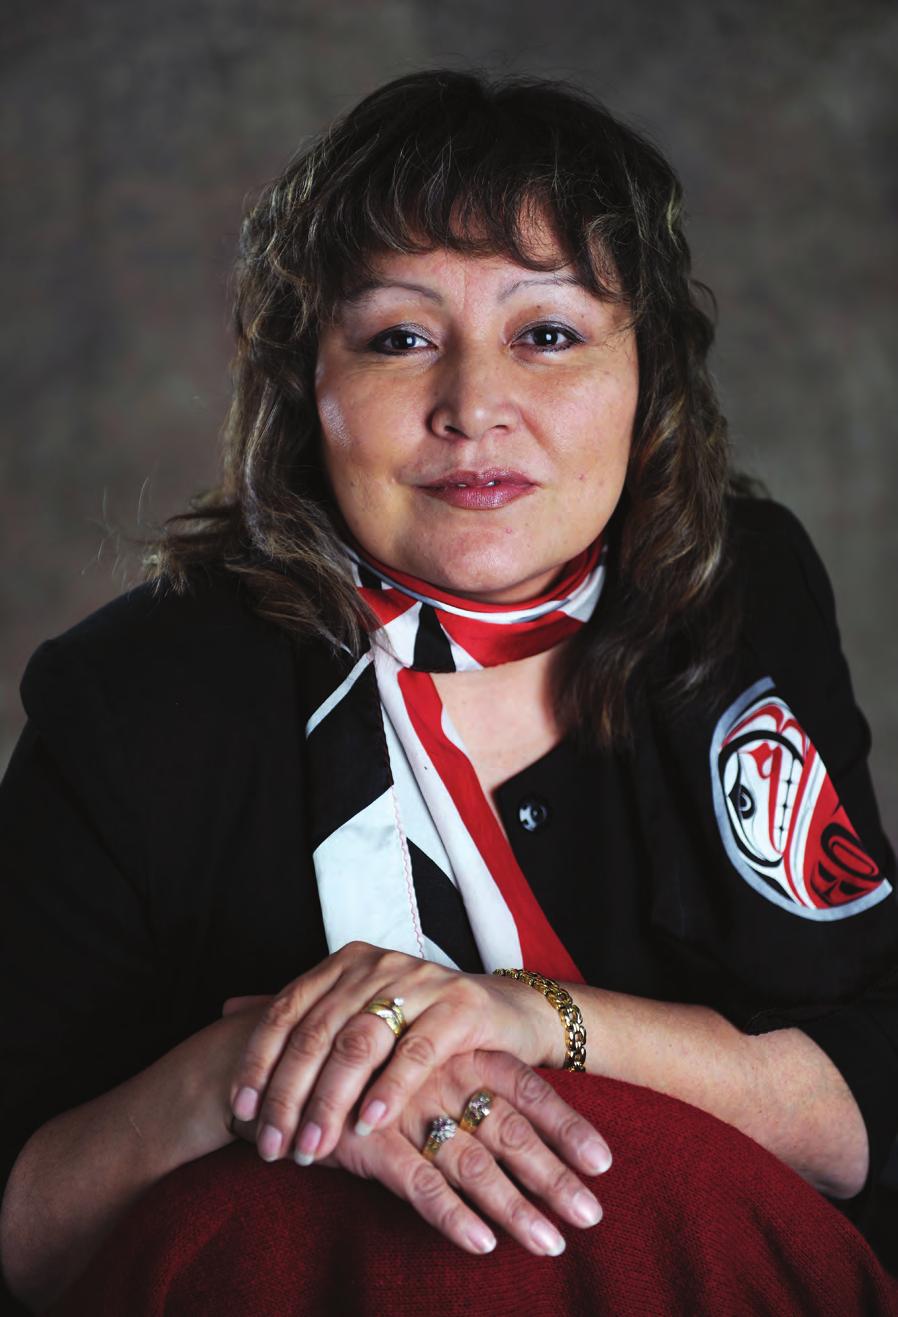 36 LEADing THE WAY First Nation Leaders